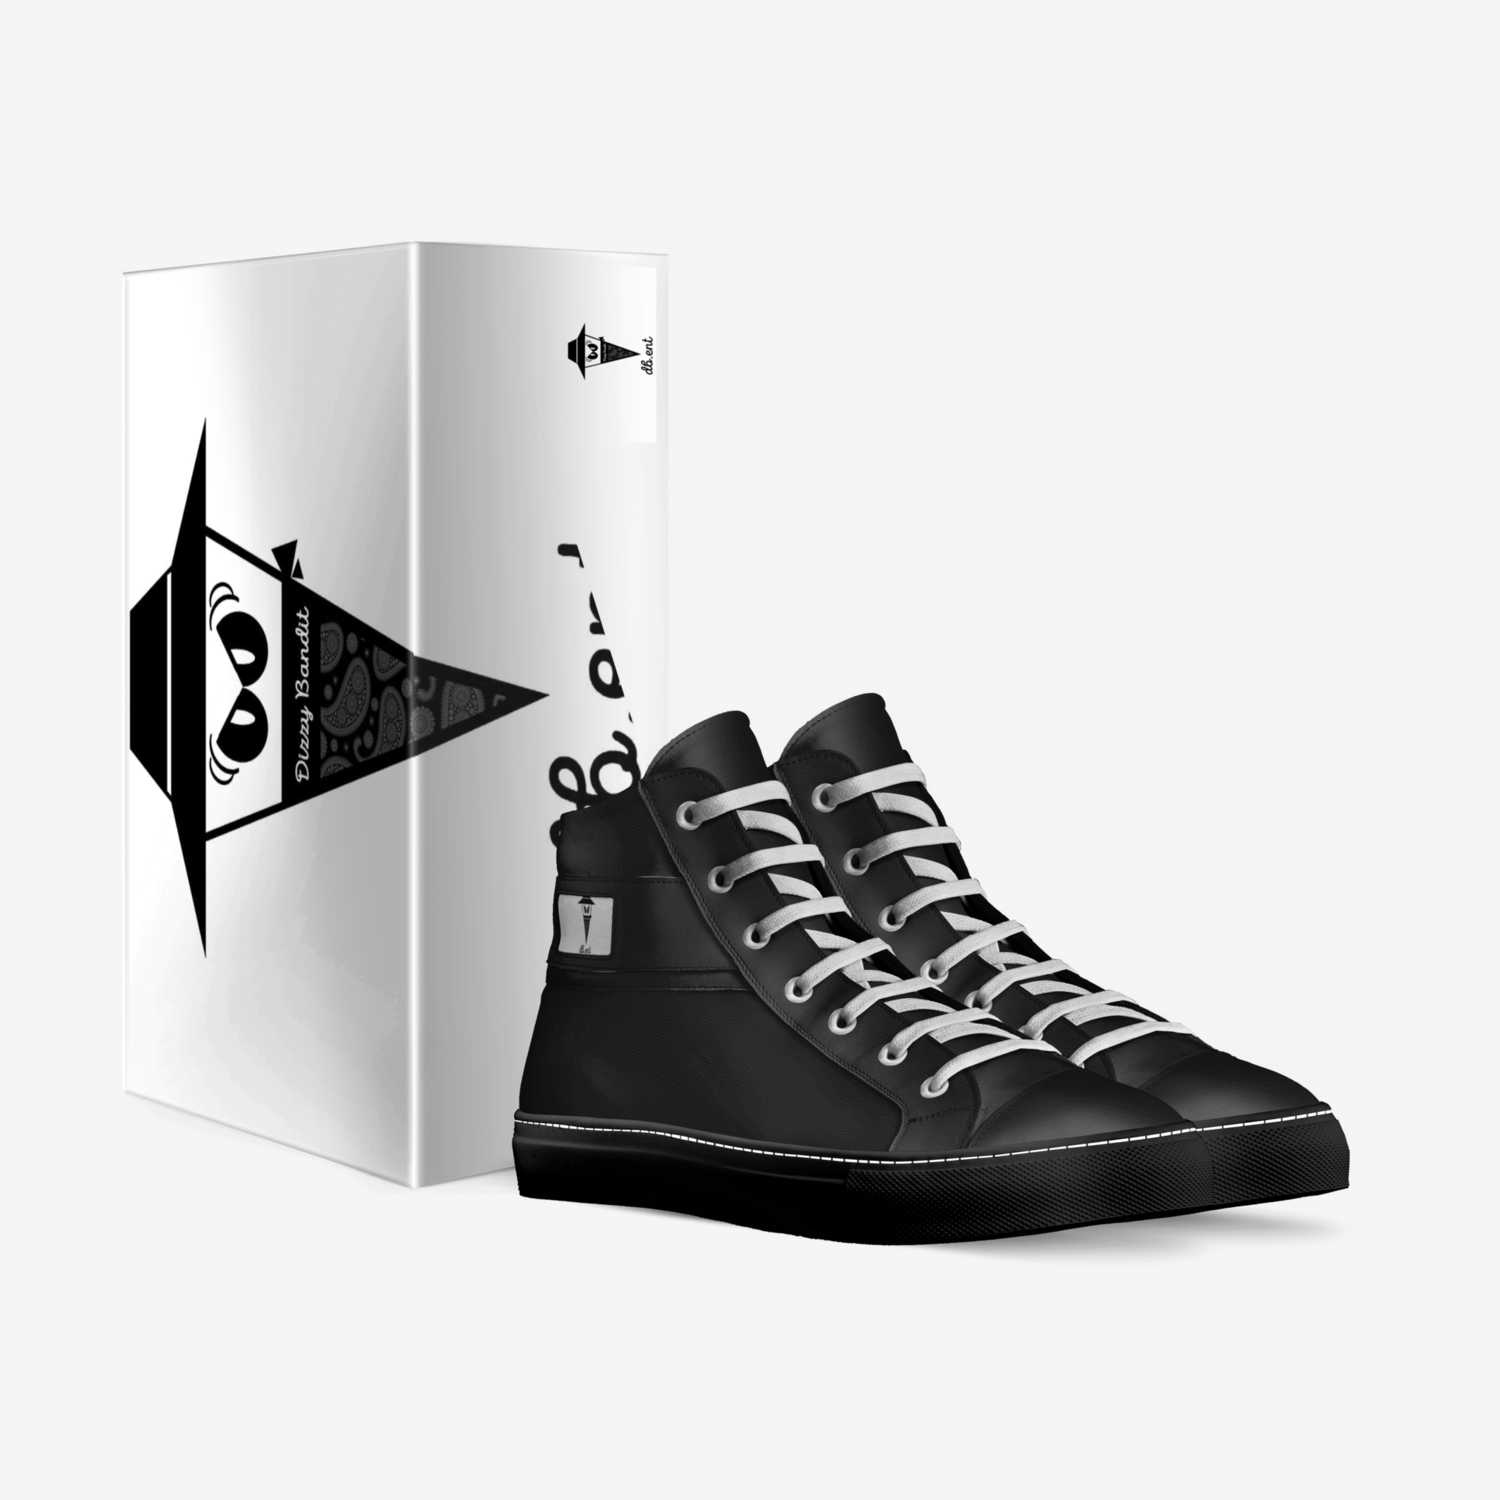 db.ent clothing  custom made in Italy shoes by William Mclellan | Box view